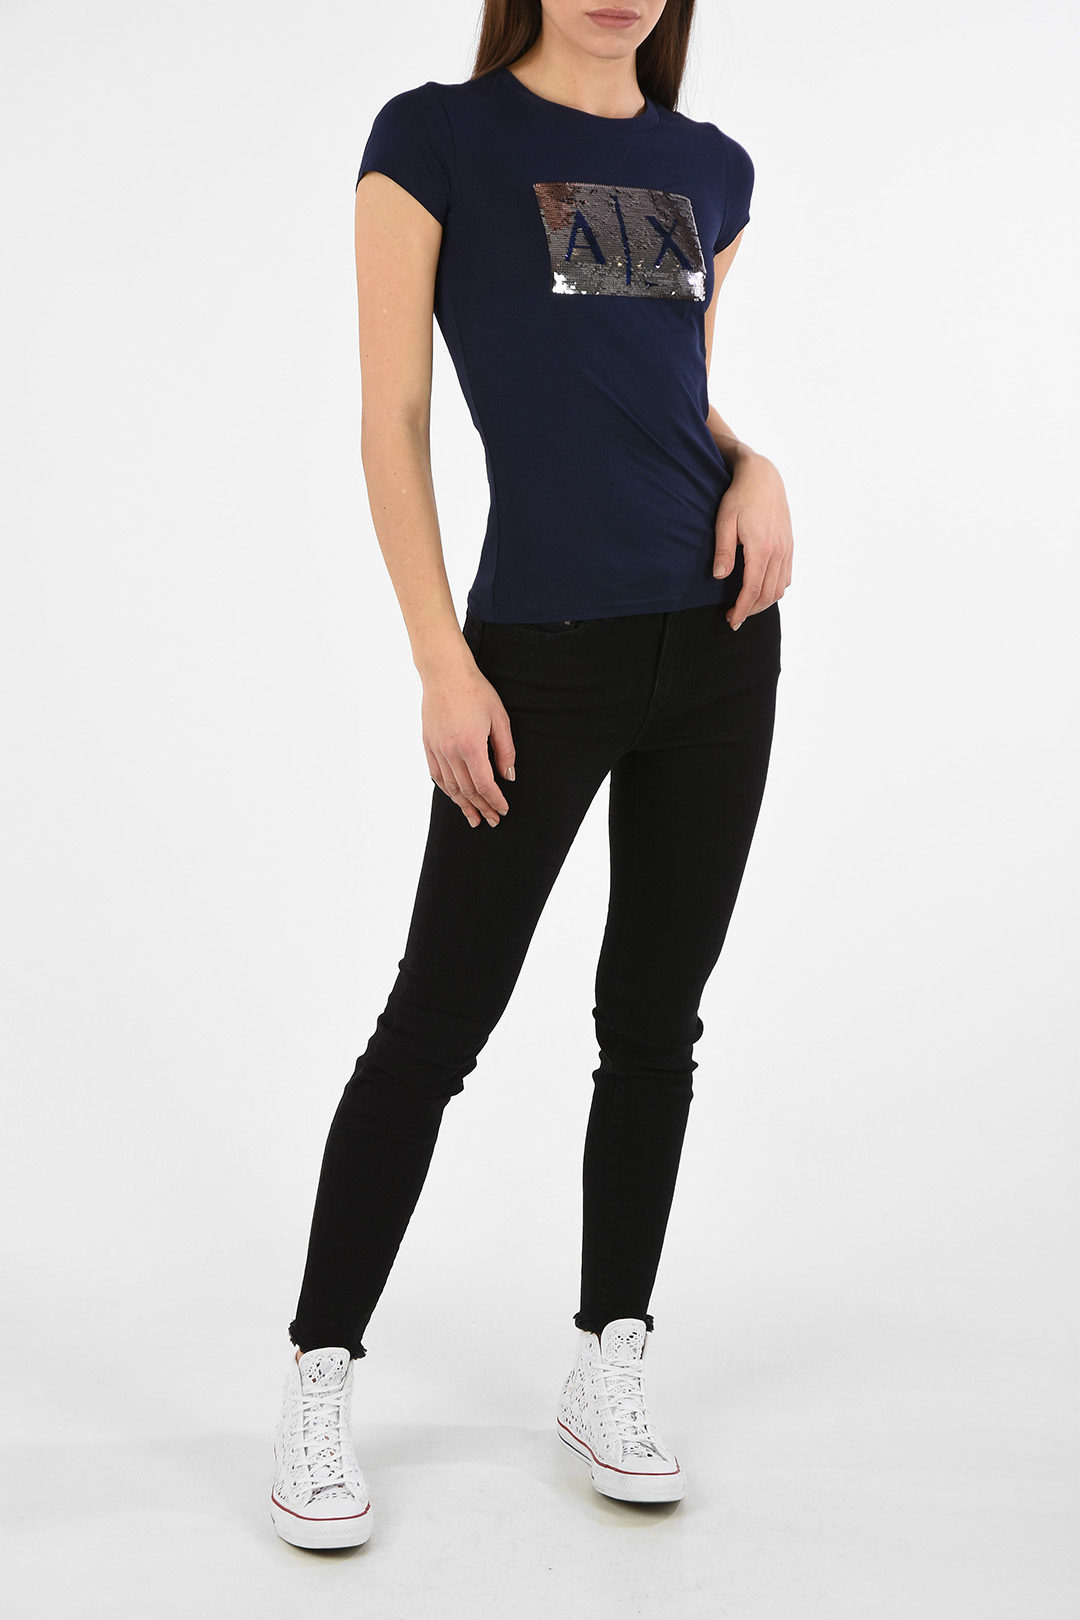 Armani ARMANI EXCHANGE Sequined T-shirt women - Outlet